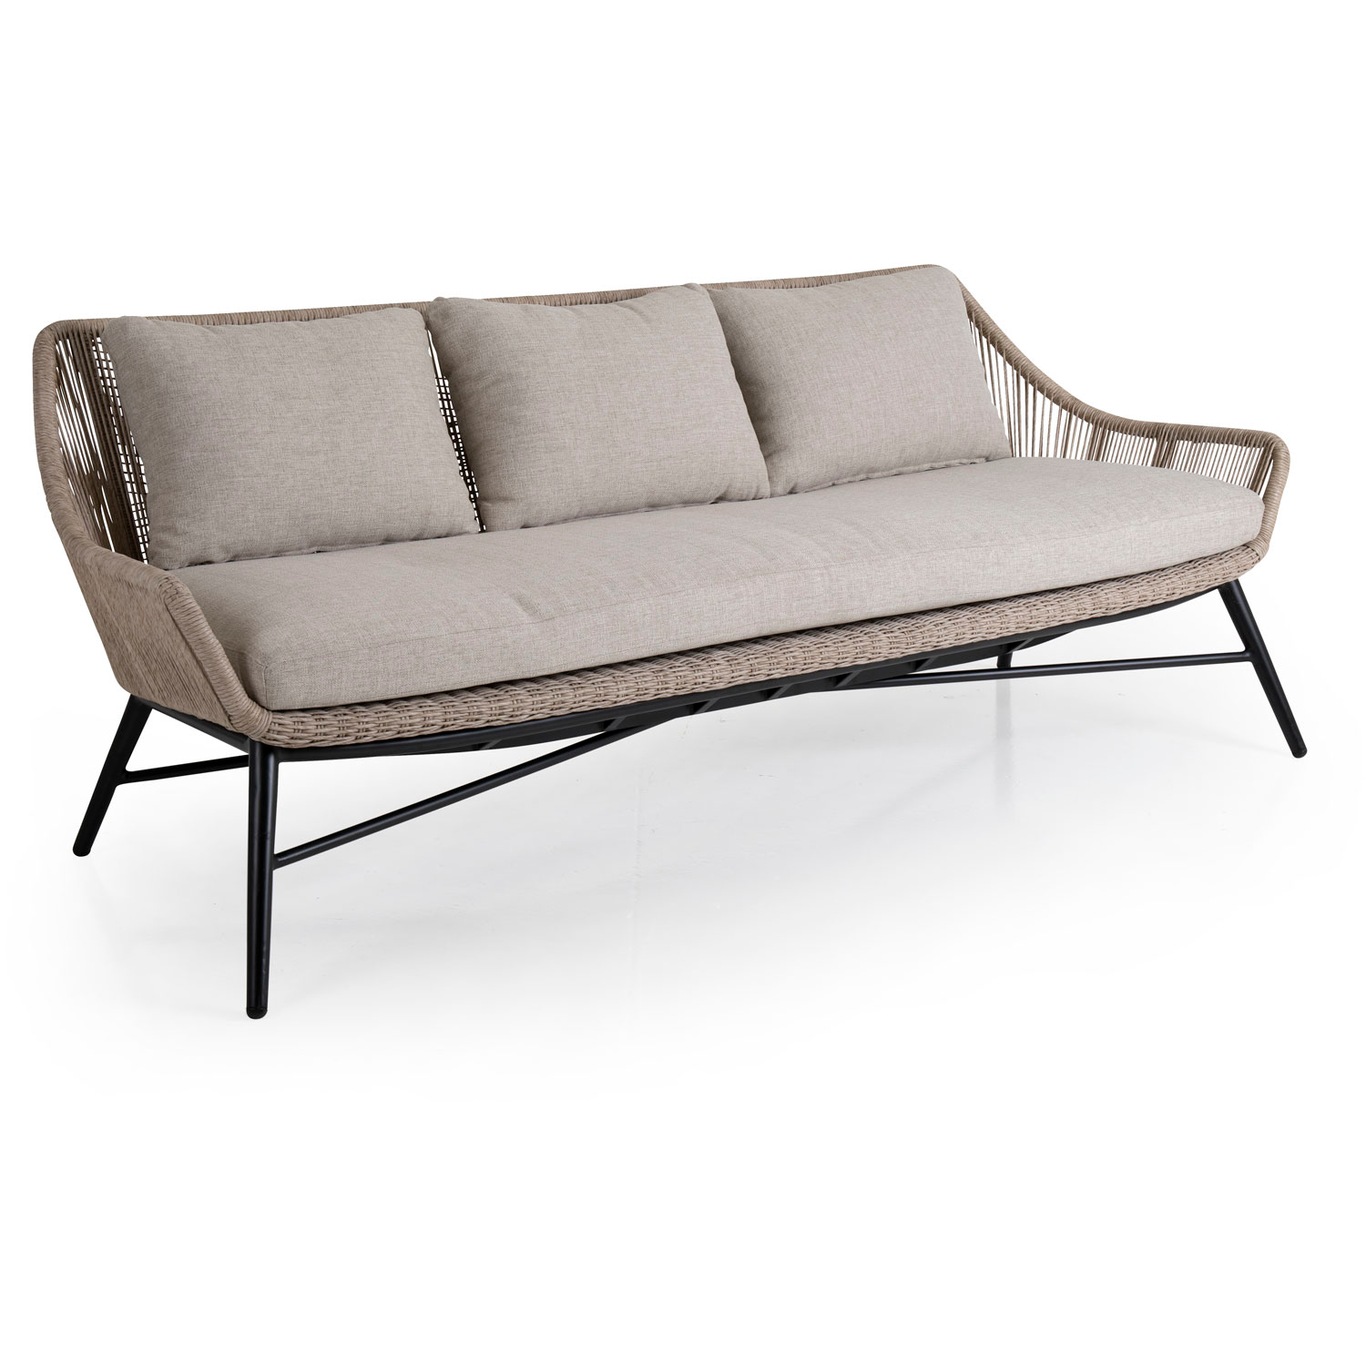 Pembroke Sofa 3-seater with Pad, Beige